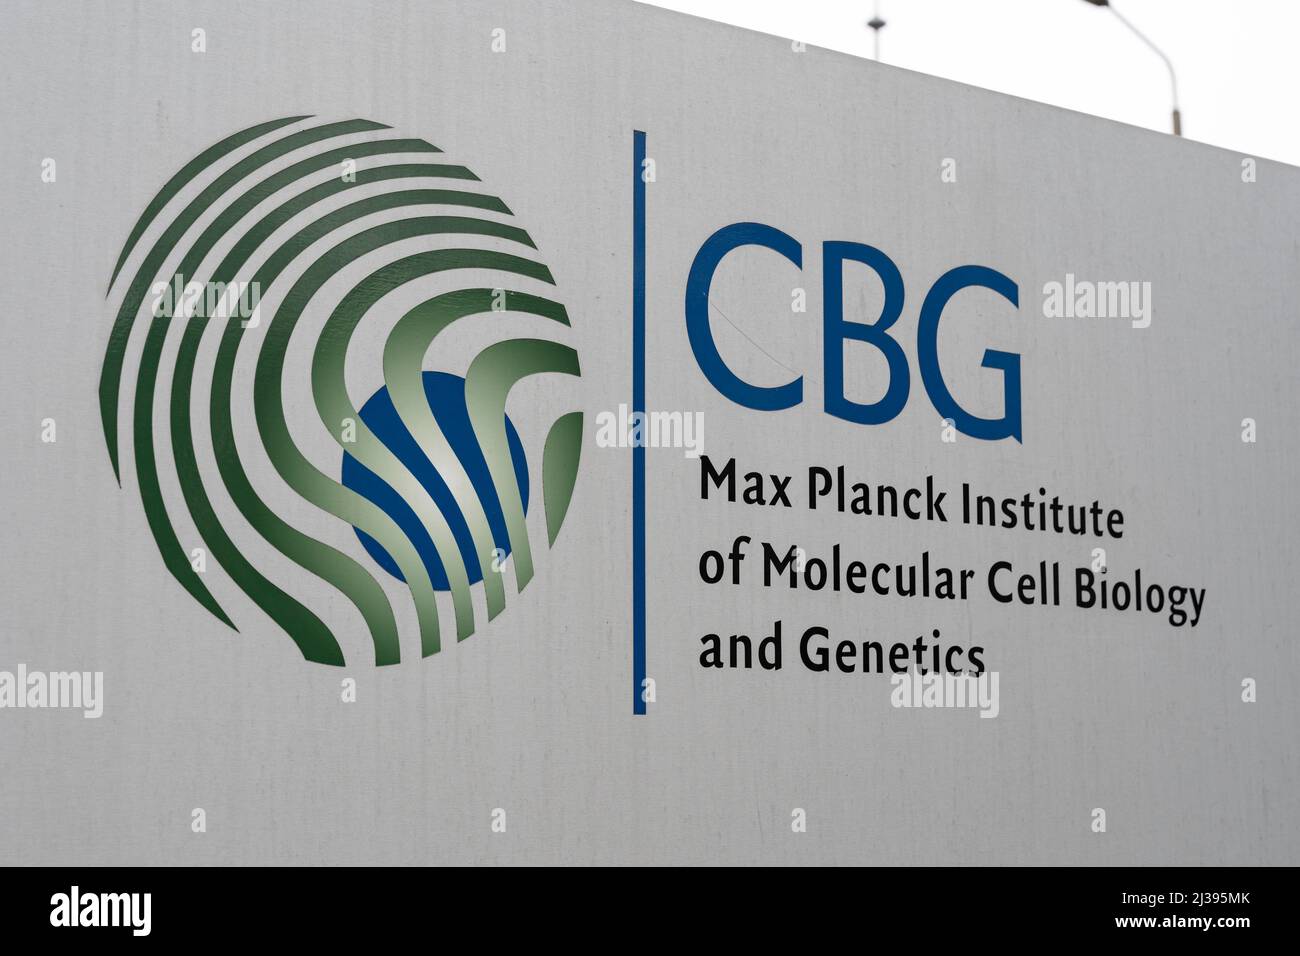 Name plate of the Max Planck Institute of Molecular Cell Biology and Genetics in the City. Grey sign with the CBG logo and letters. Research facility Stock Photo